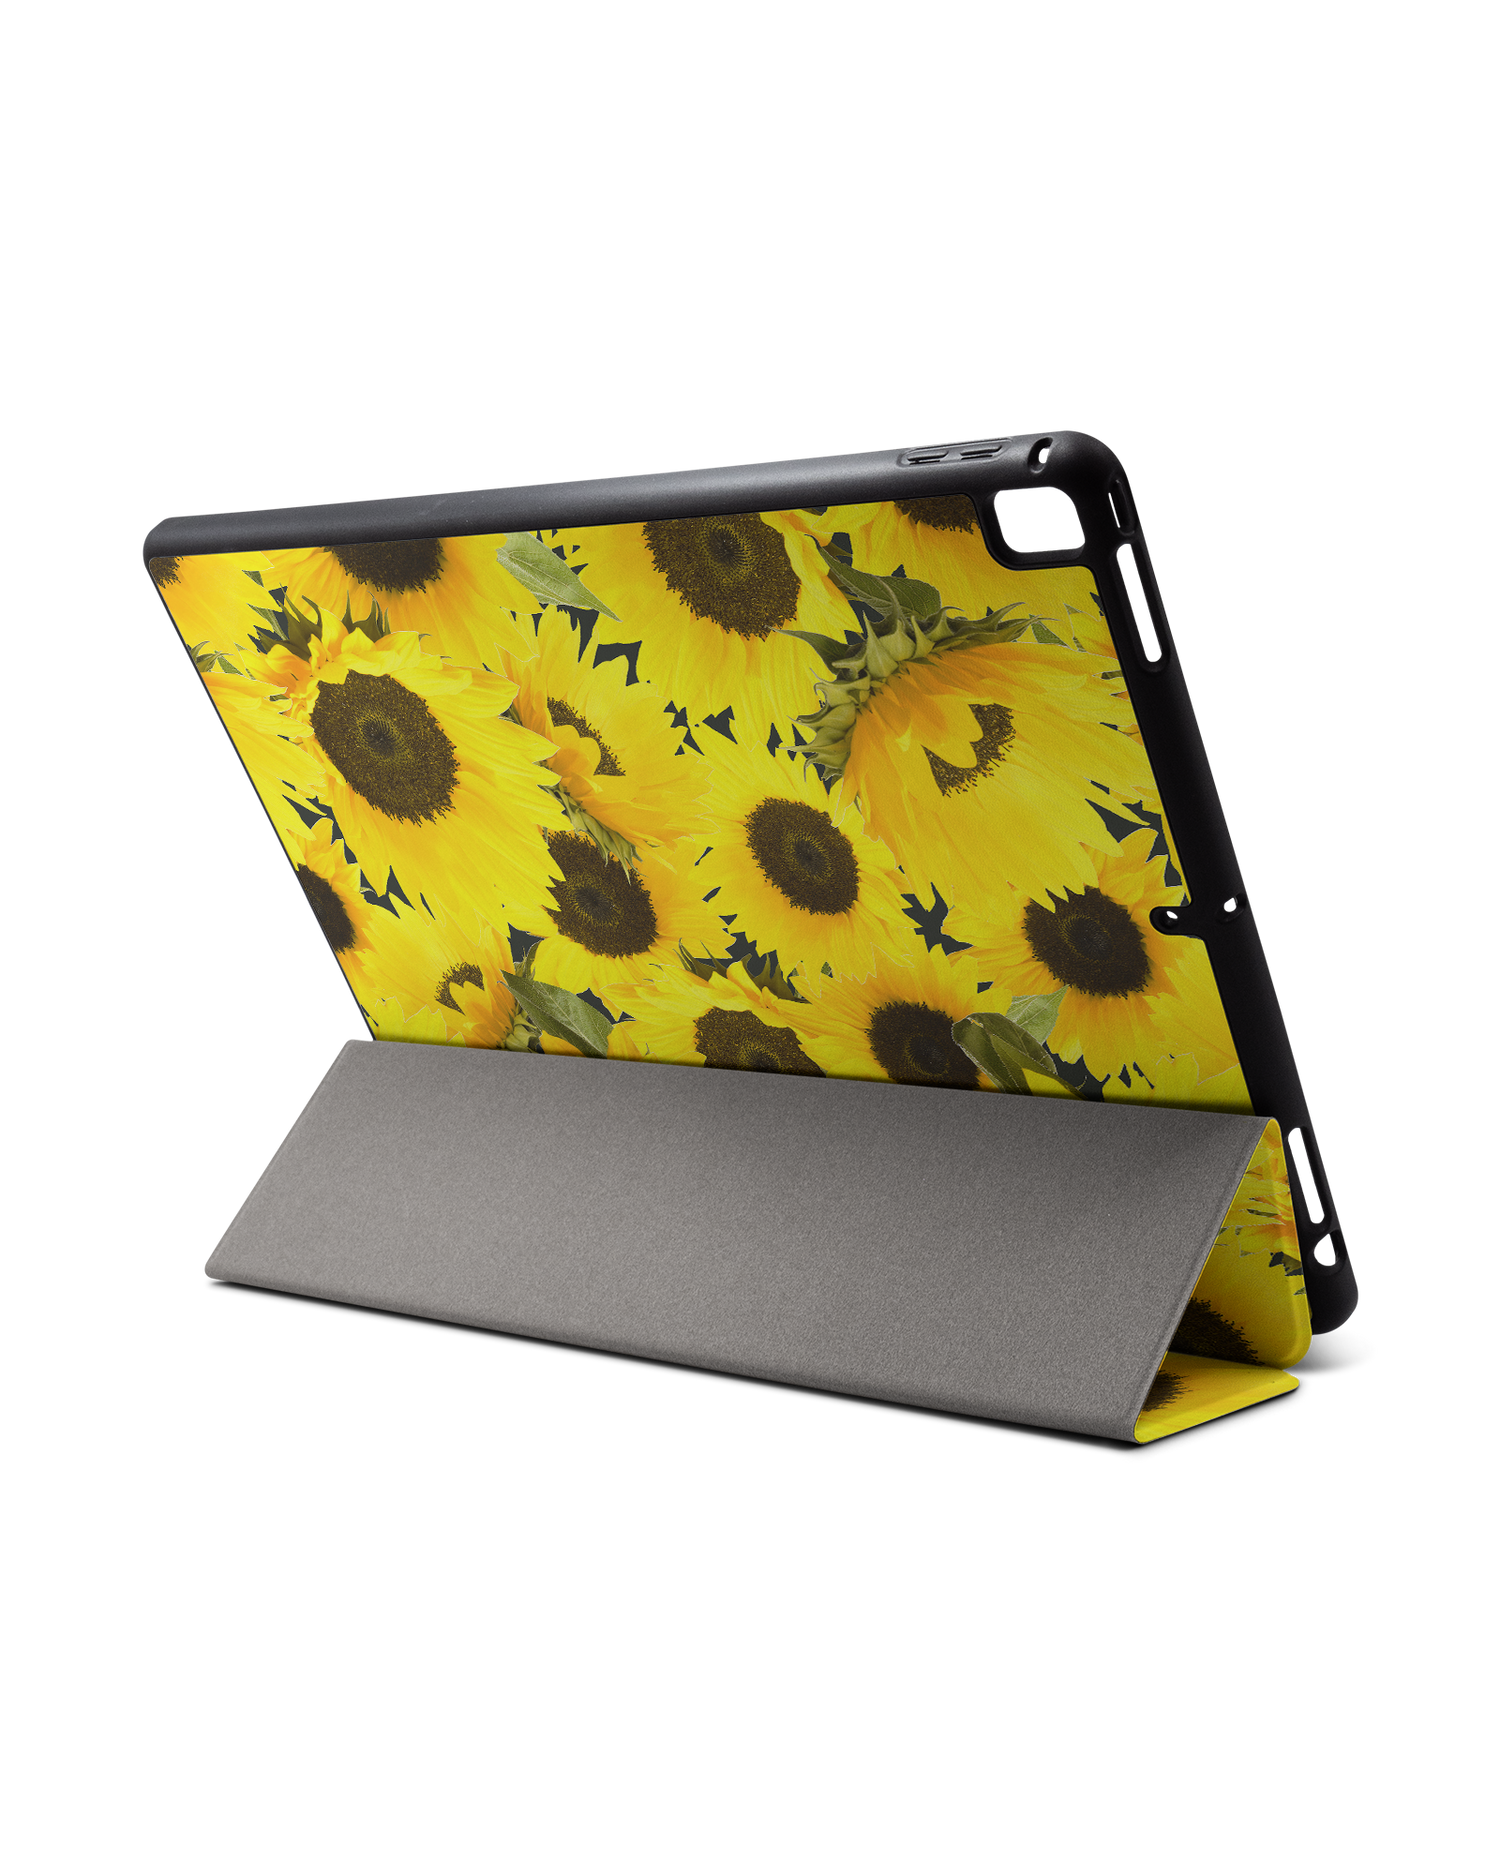 Sunflowers iPad Case with Pencil Holder for Apple iPad Pro 2 12.9